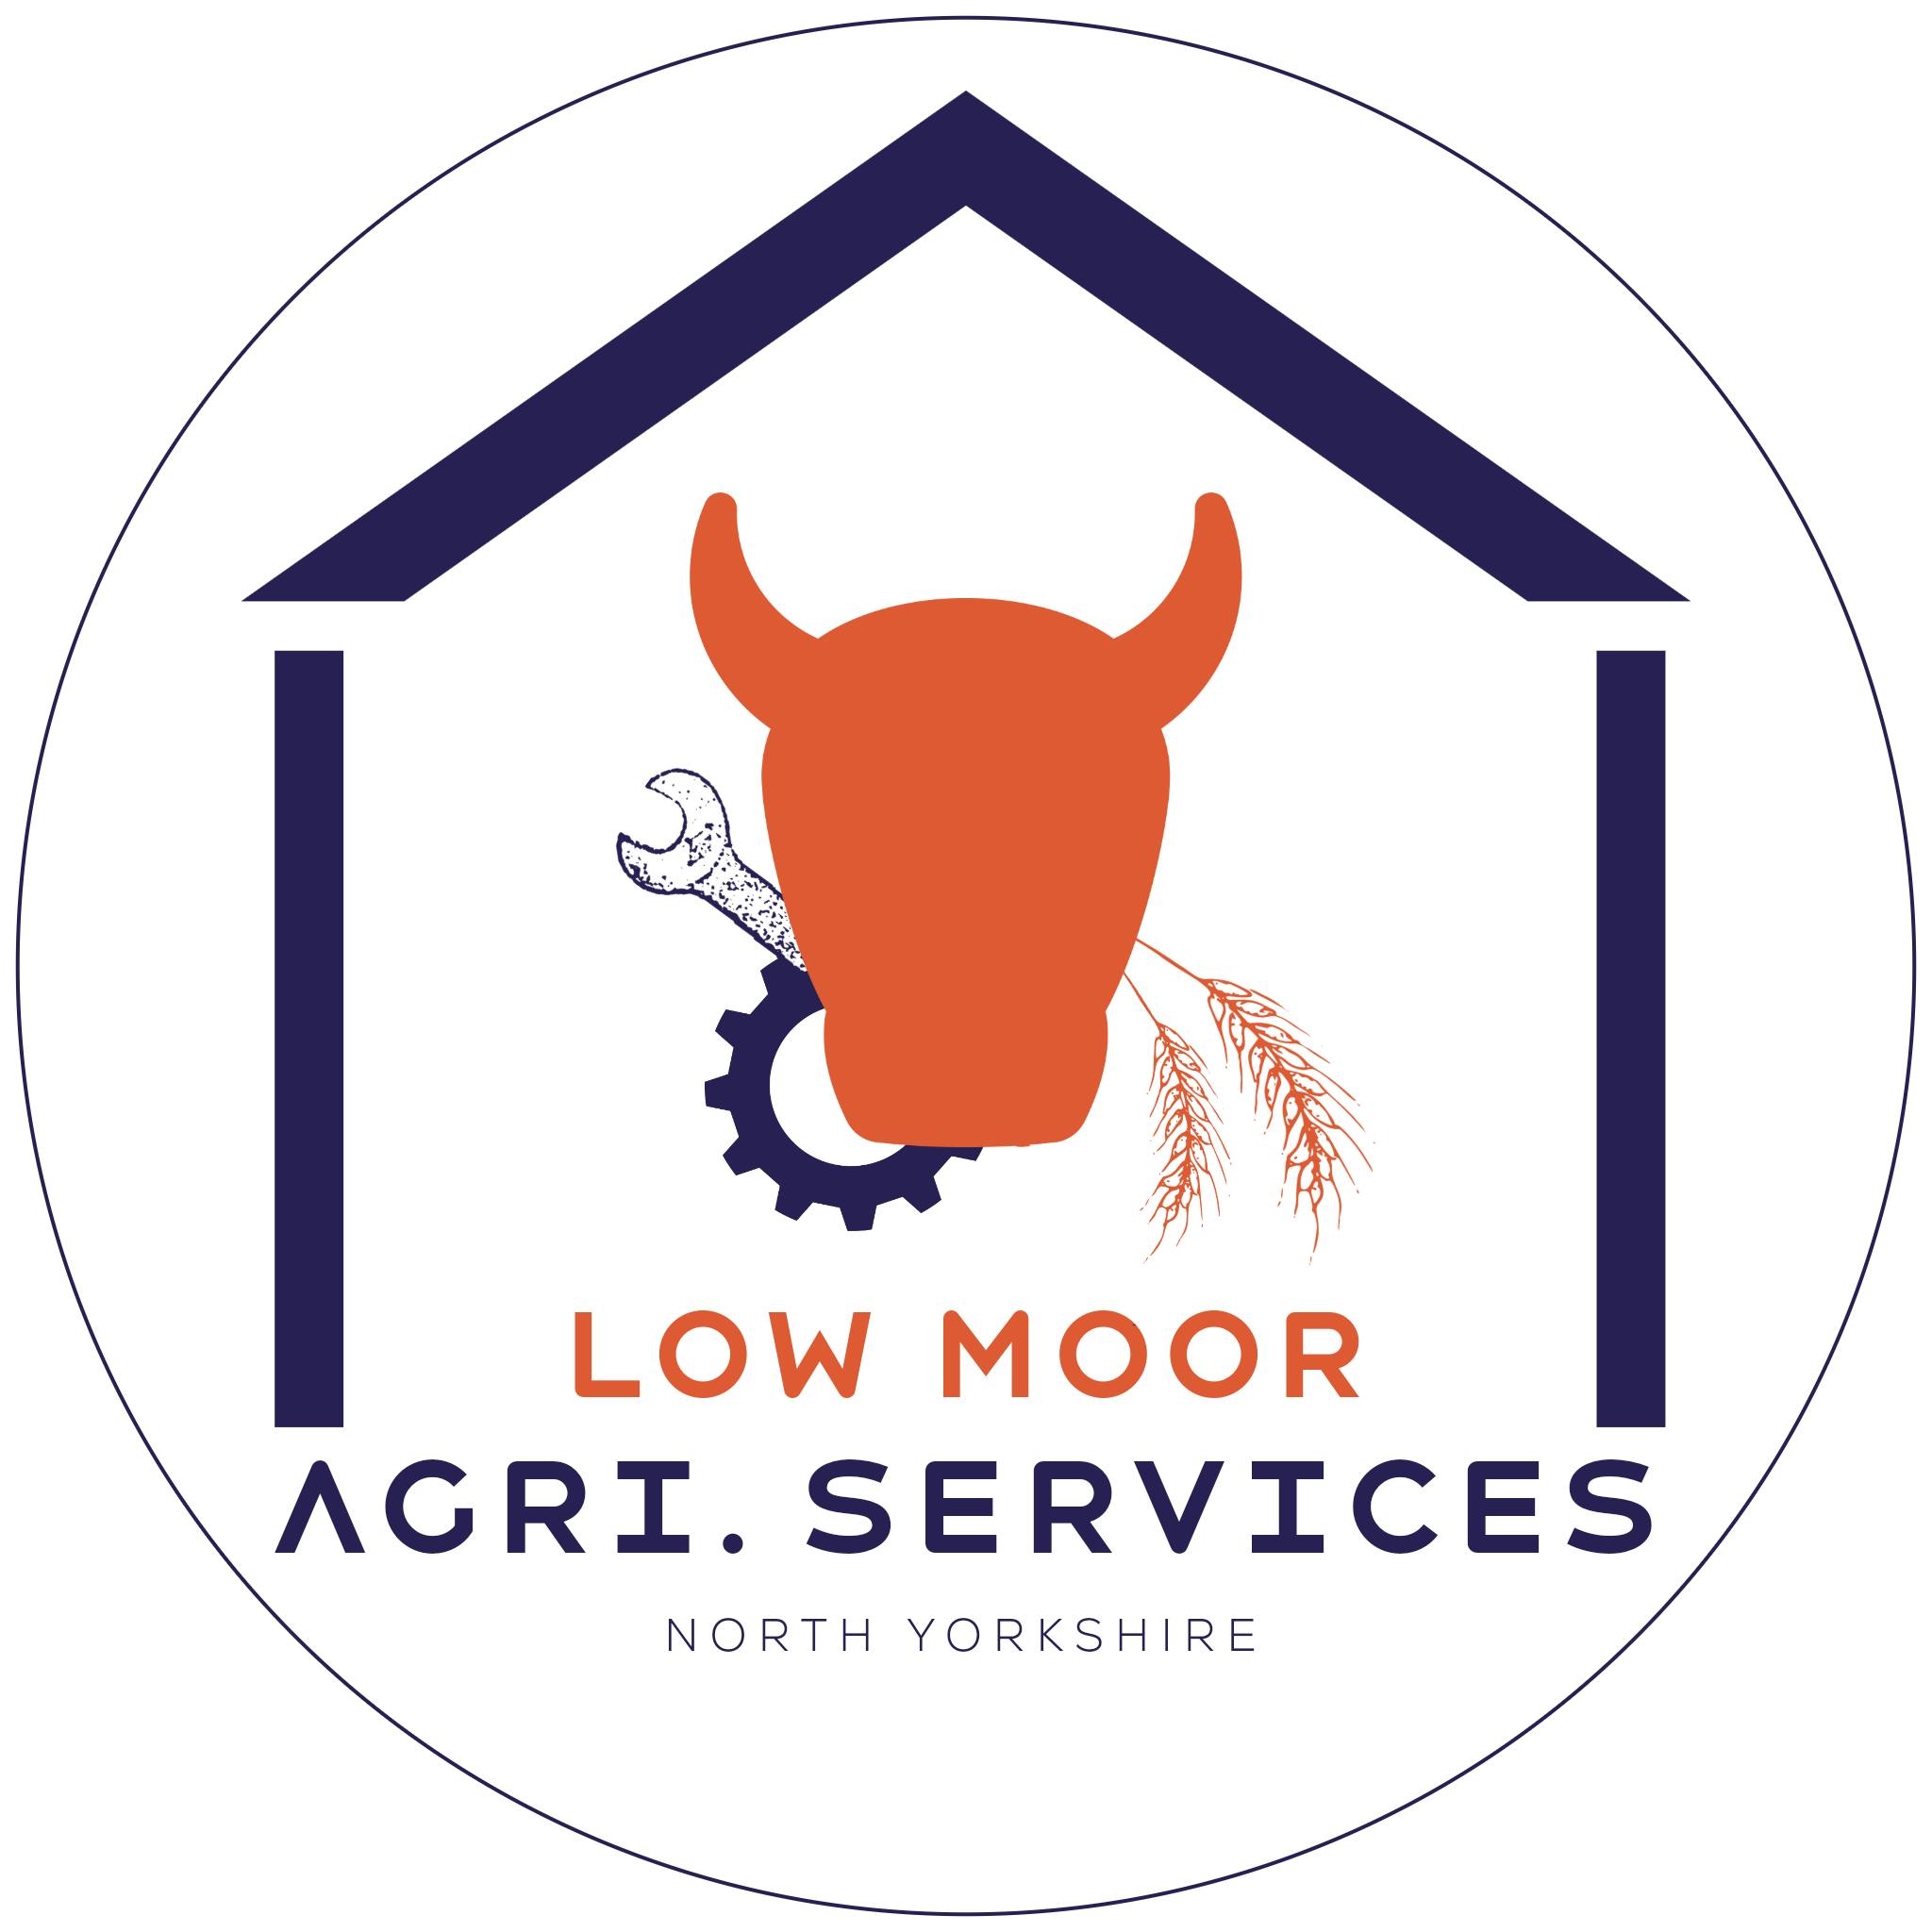 LOW MOOR AGRI SERVICES